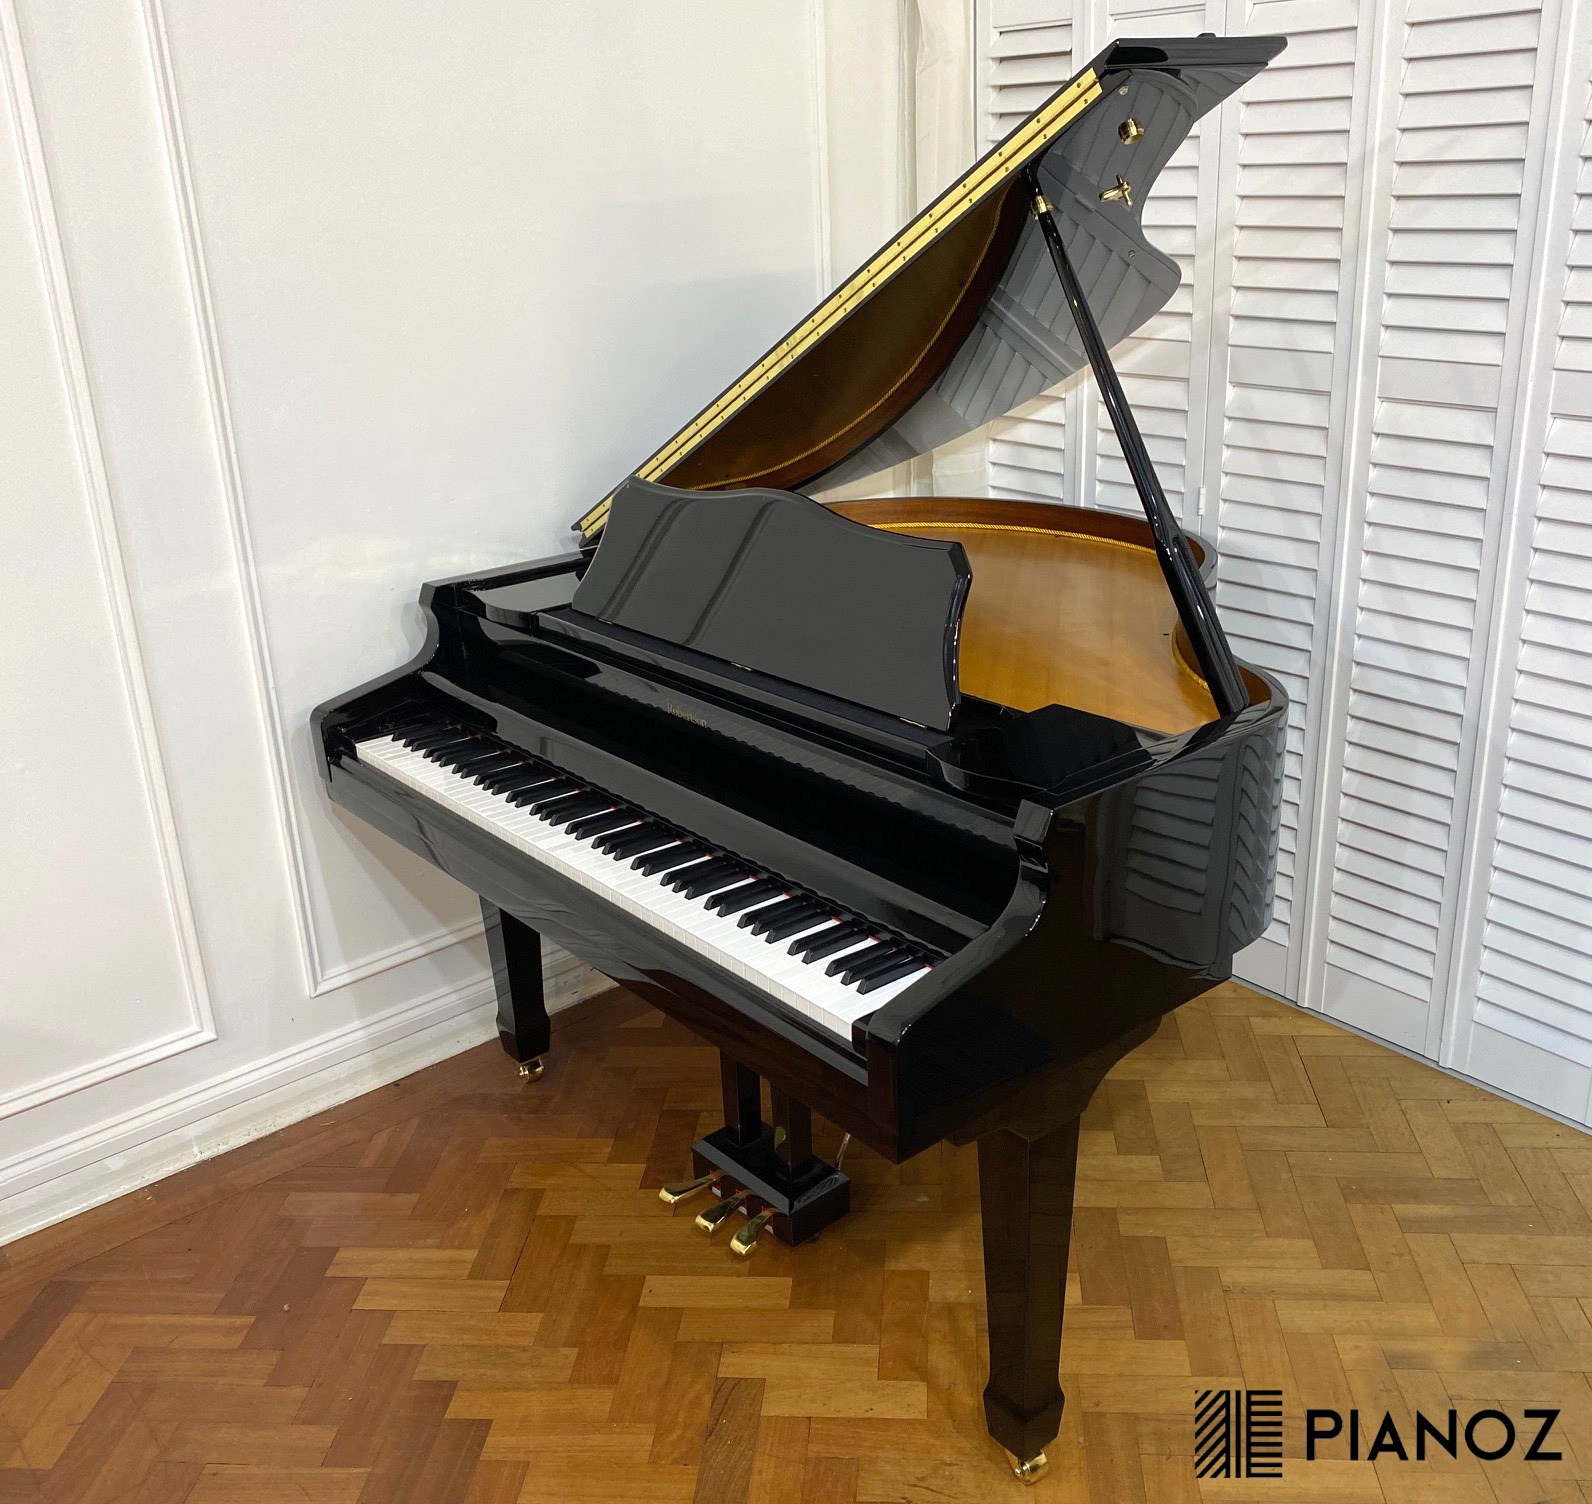 Robertson Self Playing Digital Baby Grand Piano piano for sale in UK